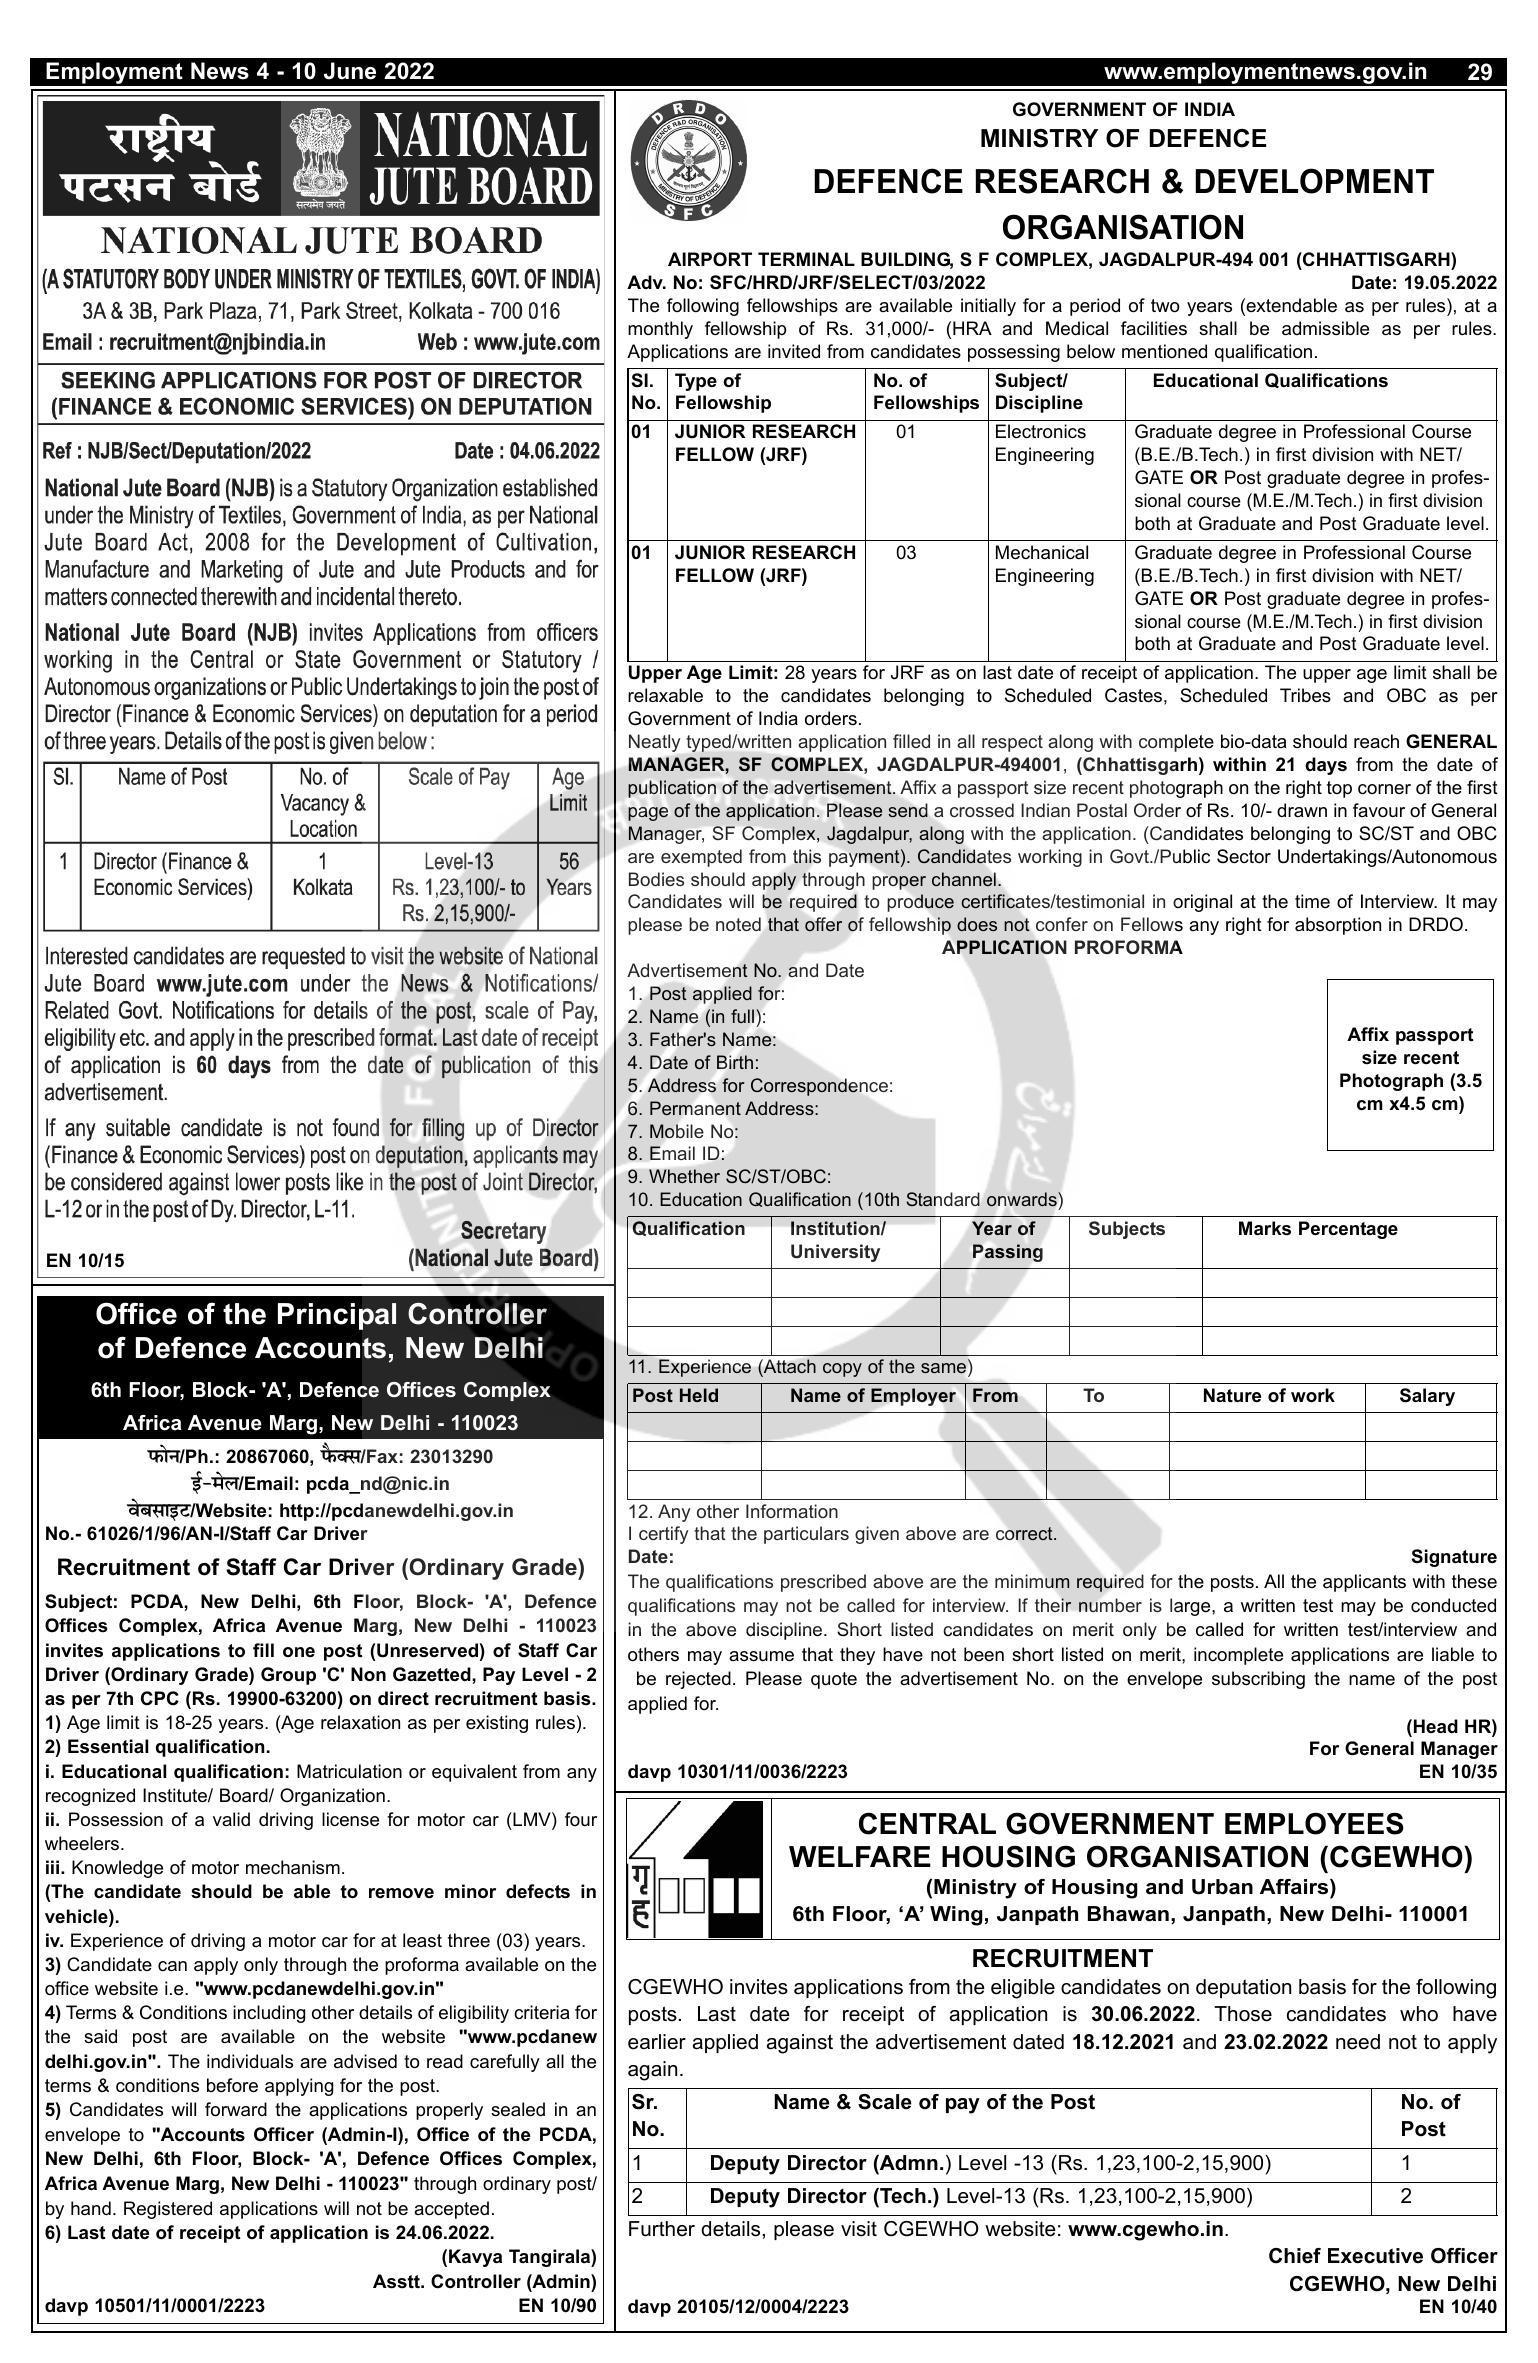 National Jute Board Director (Finance & Economic Services) Recruitment 2022 - Page 1